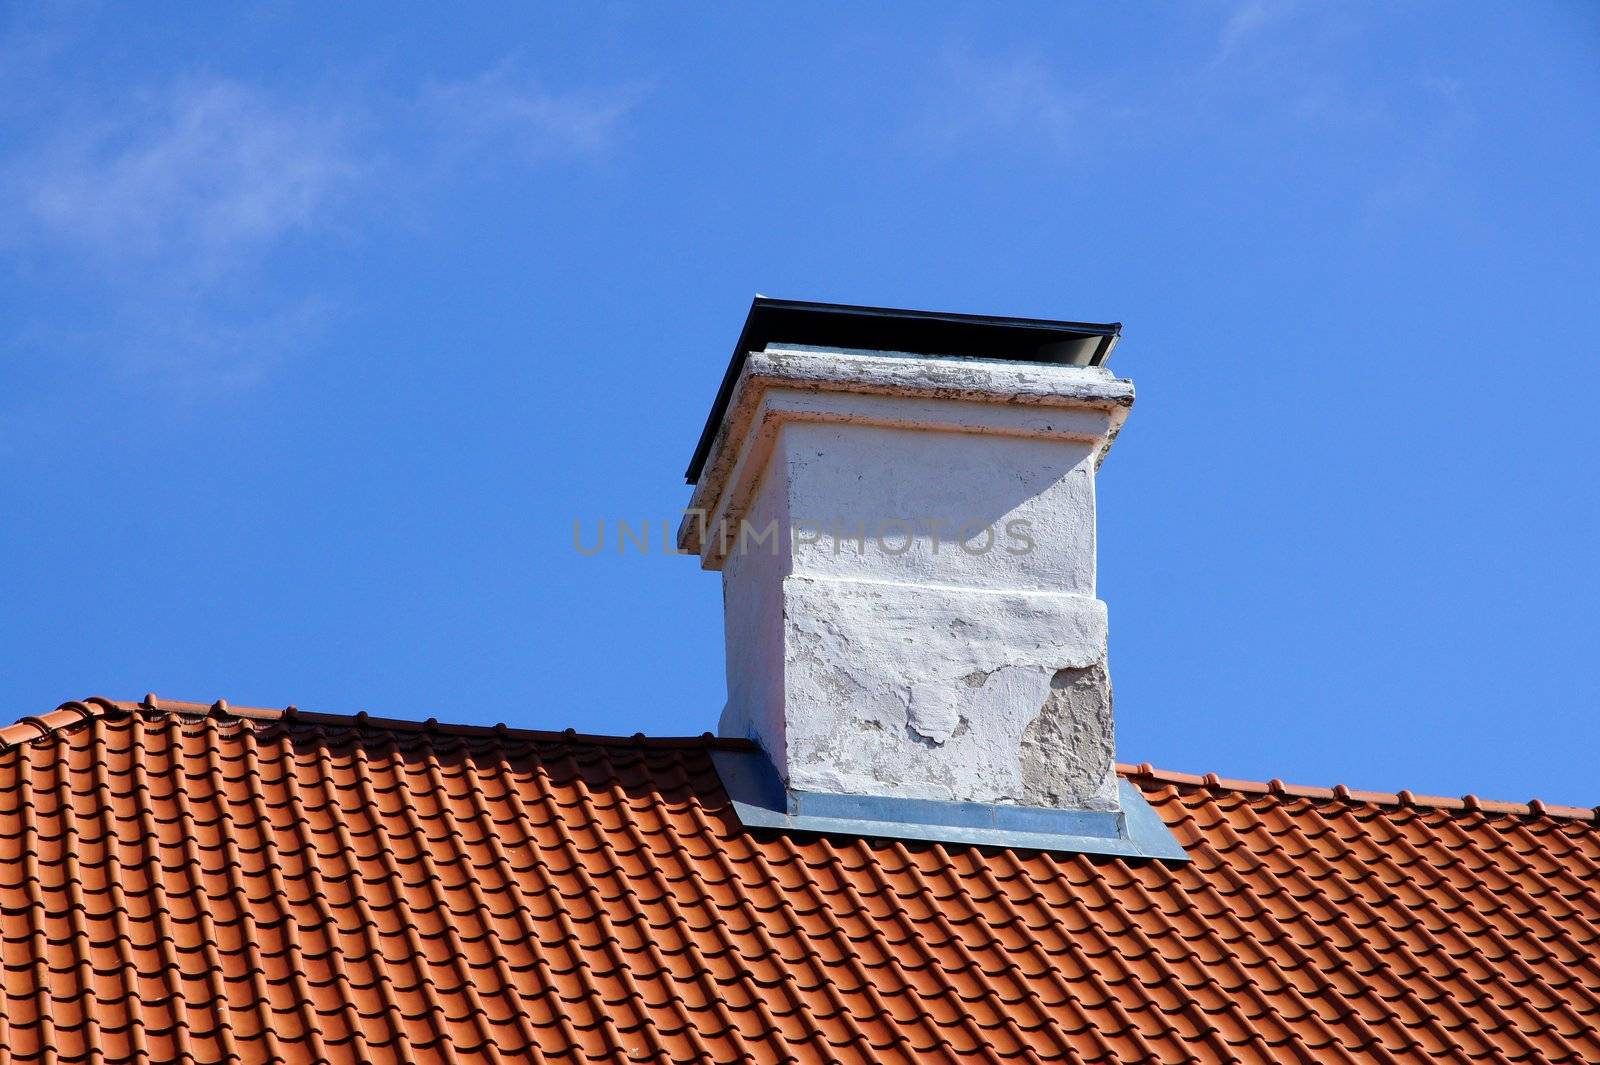 The roof and chimney with blue sky